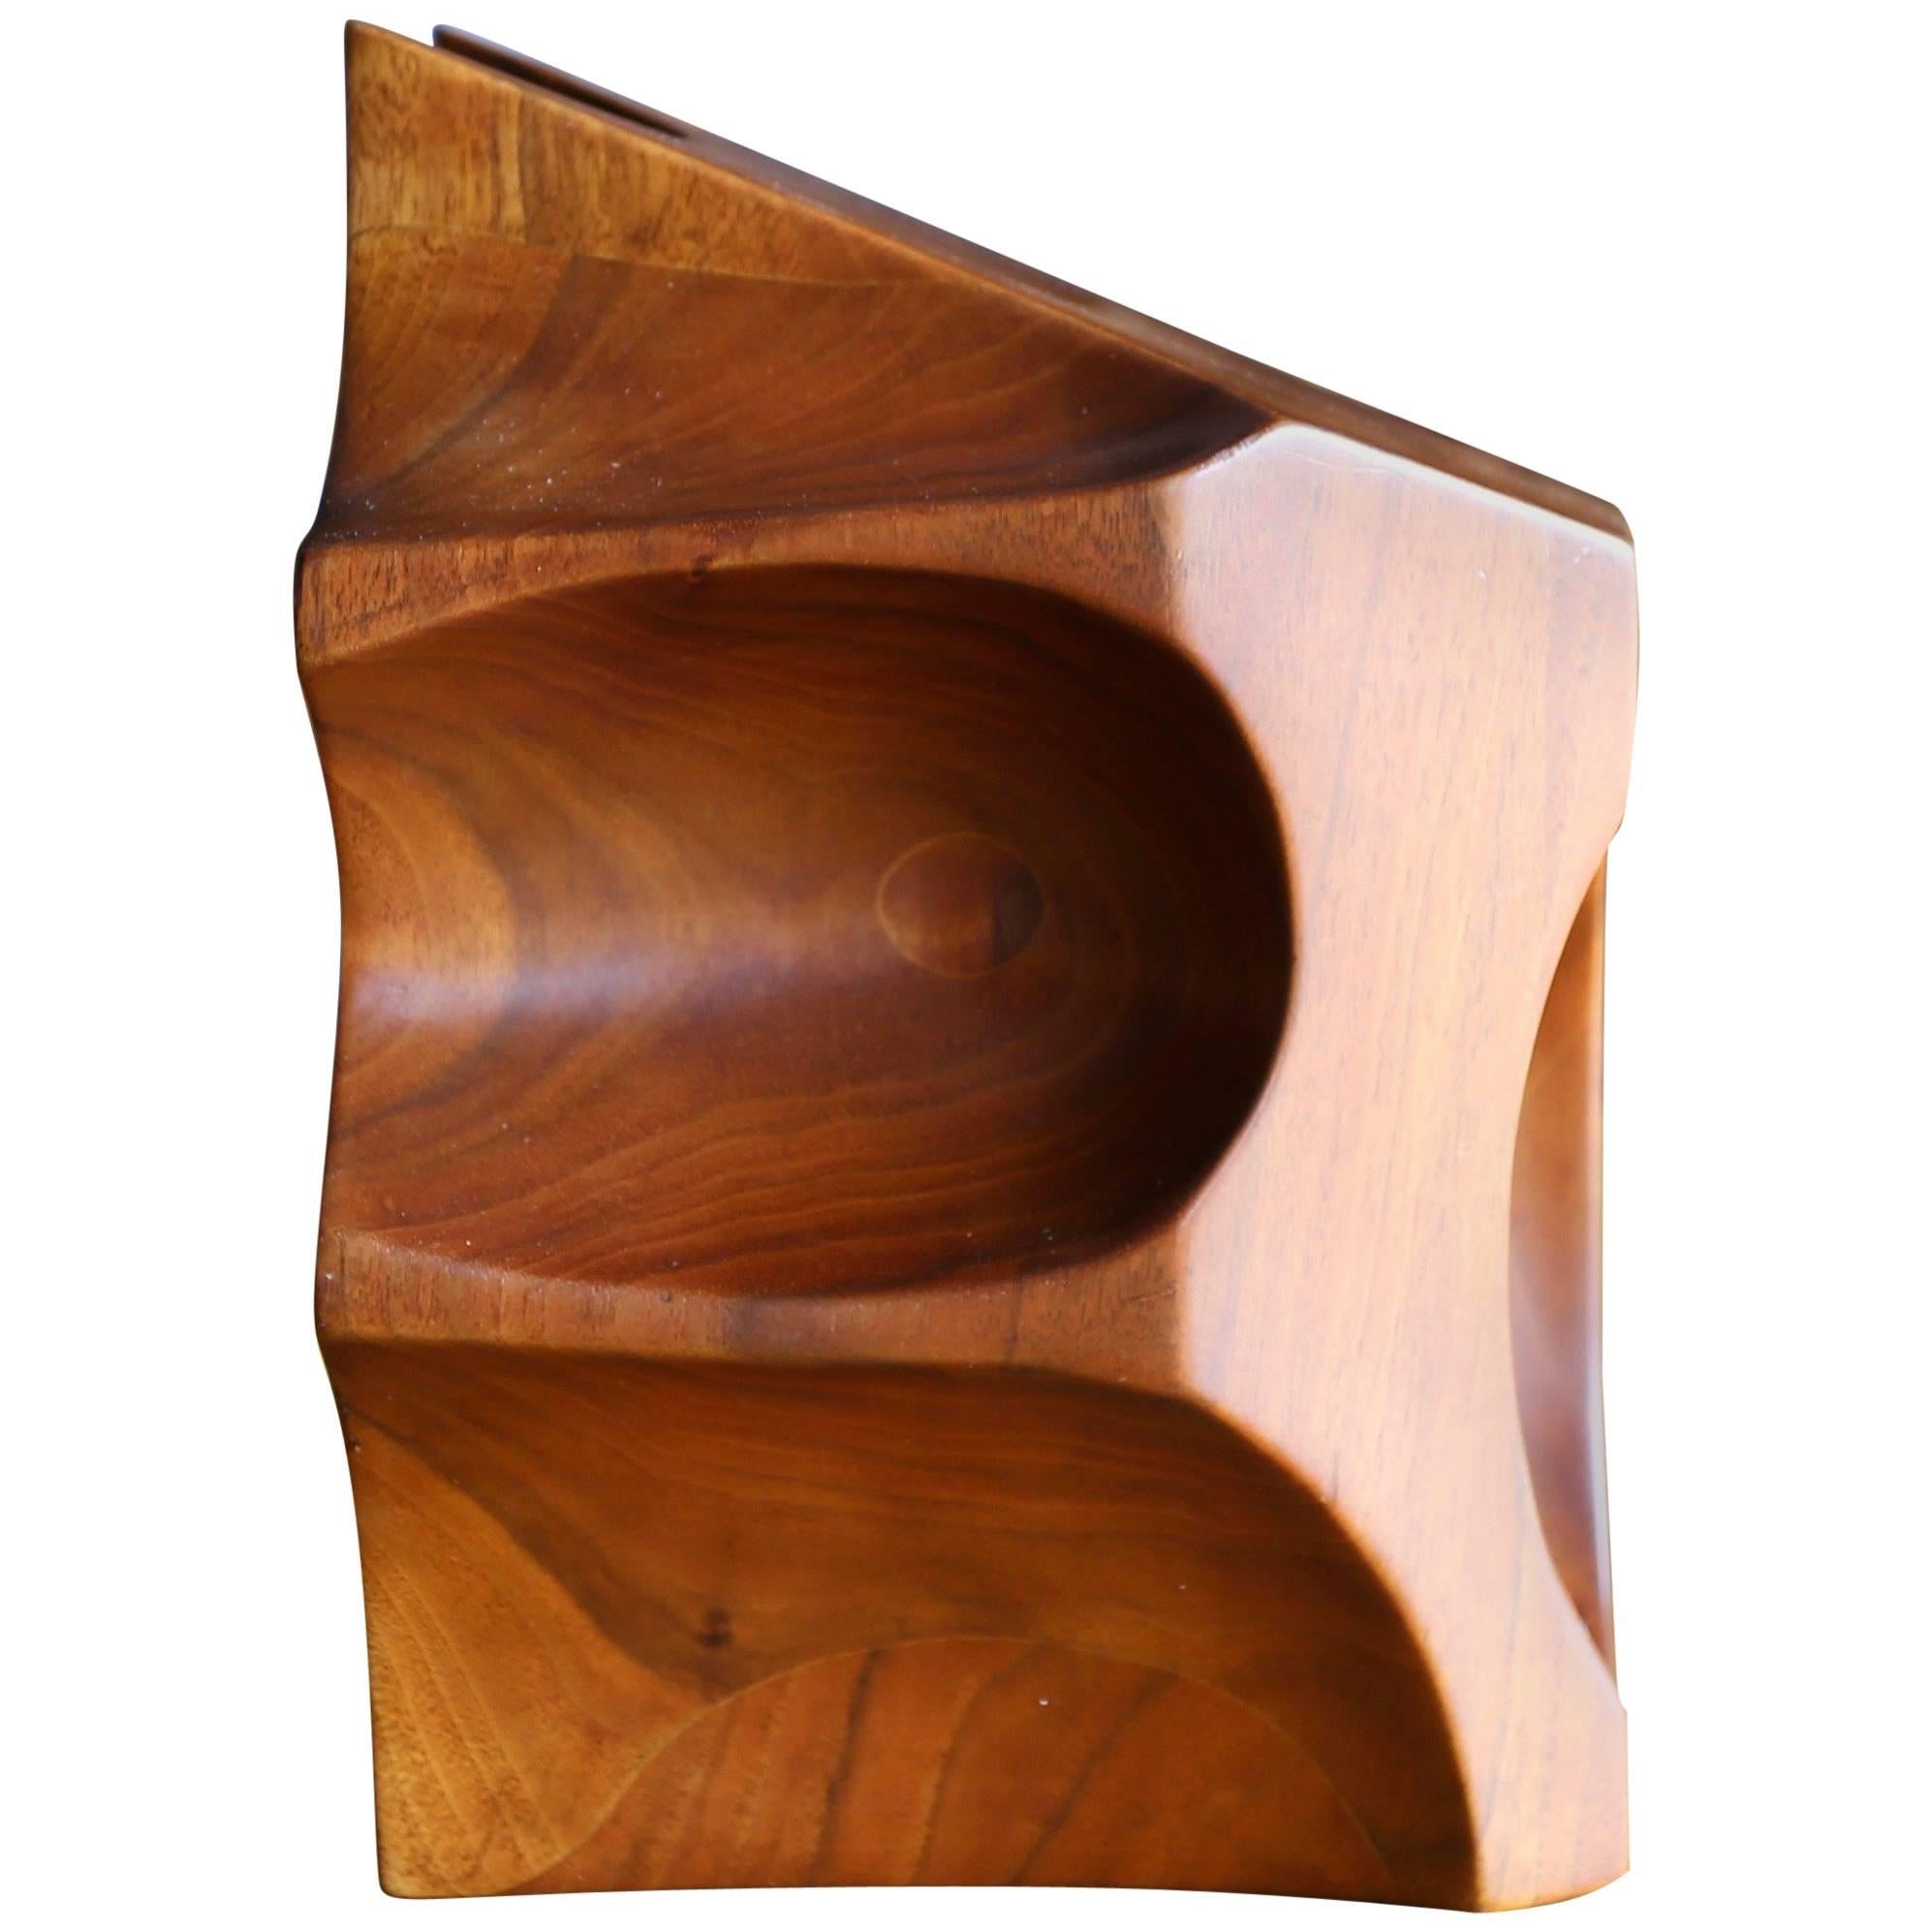 Solid Walnut Wood Abstract Sculpture